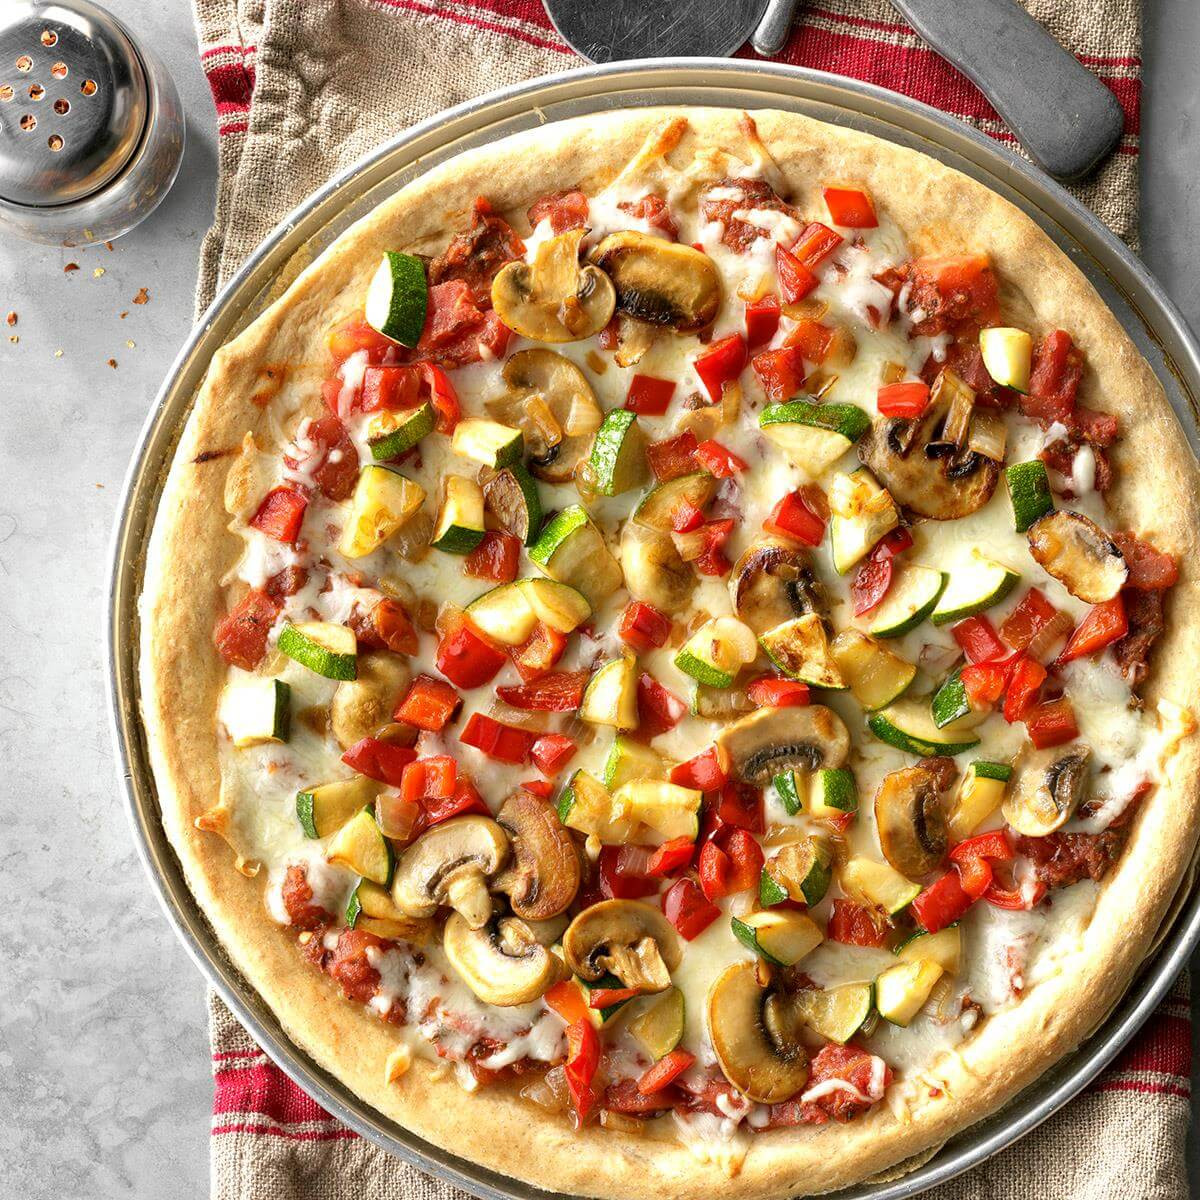 Vegetarian Pizza Recipes
 30 Ve arian Pizza Recipes for Veggie Lovers